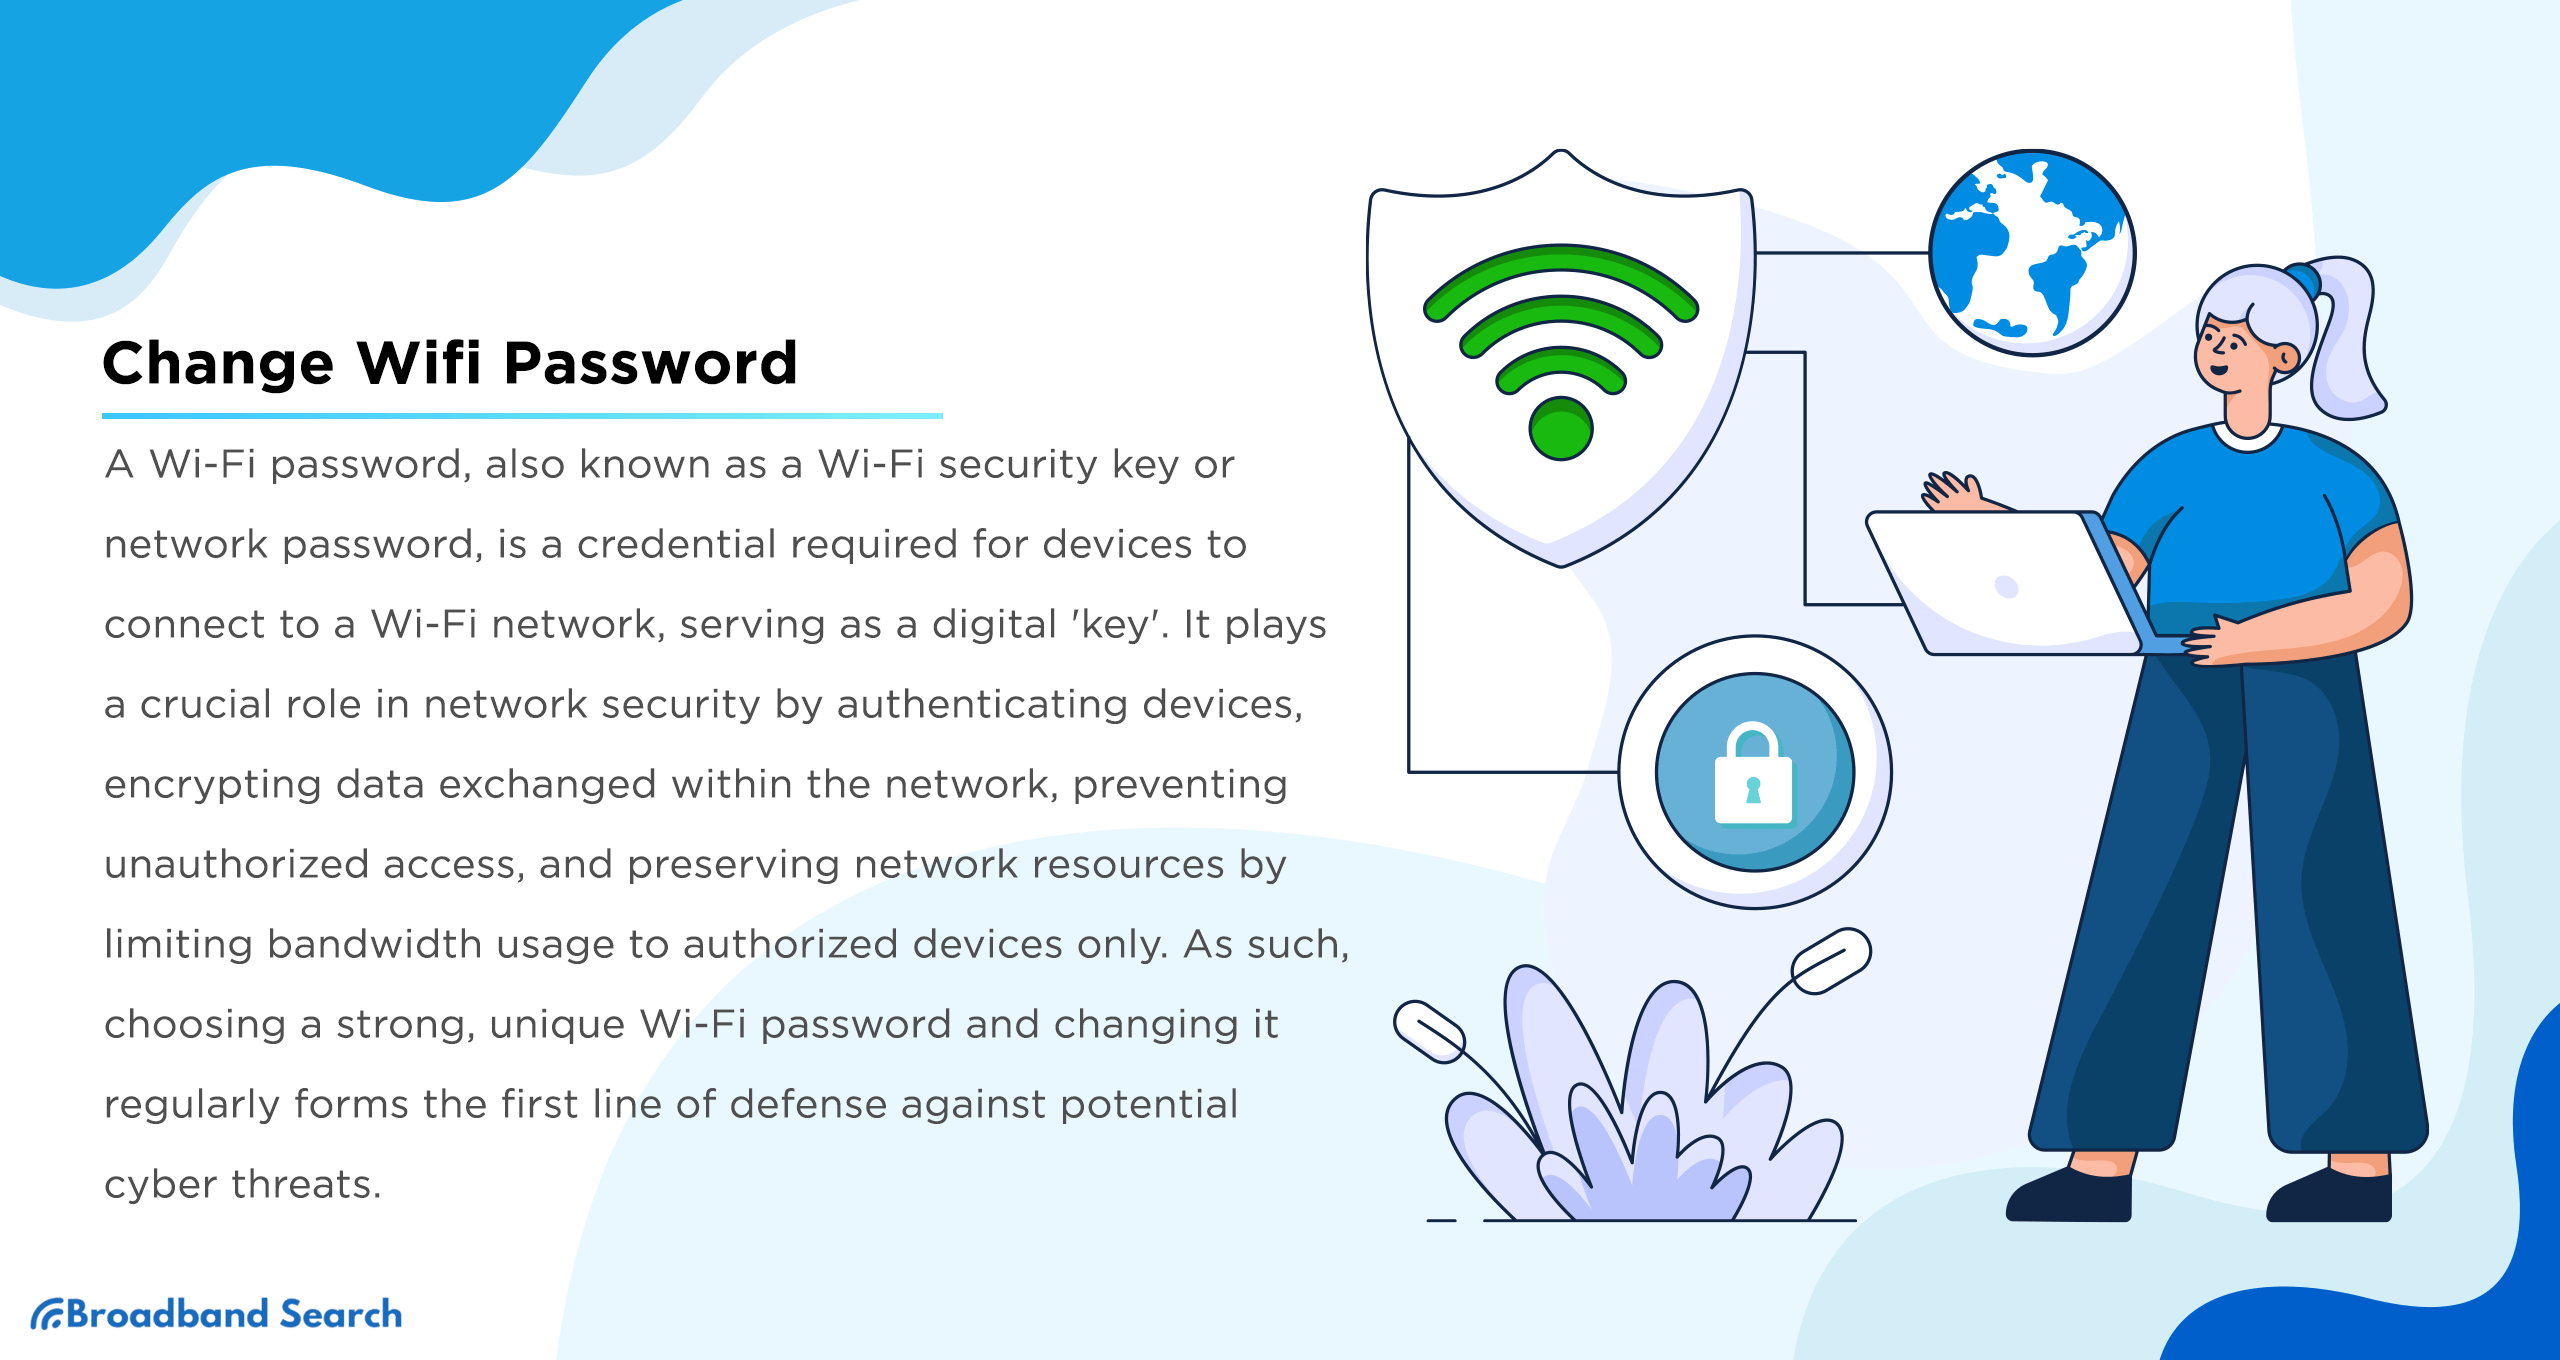 Tips for When You Change Your Wi-Fi Password